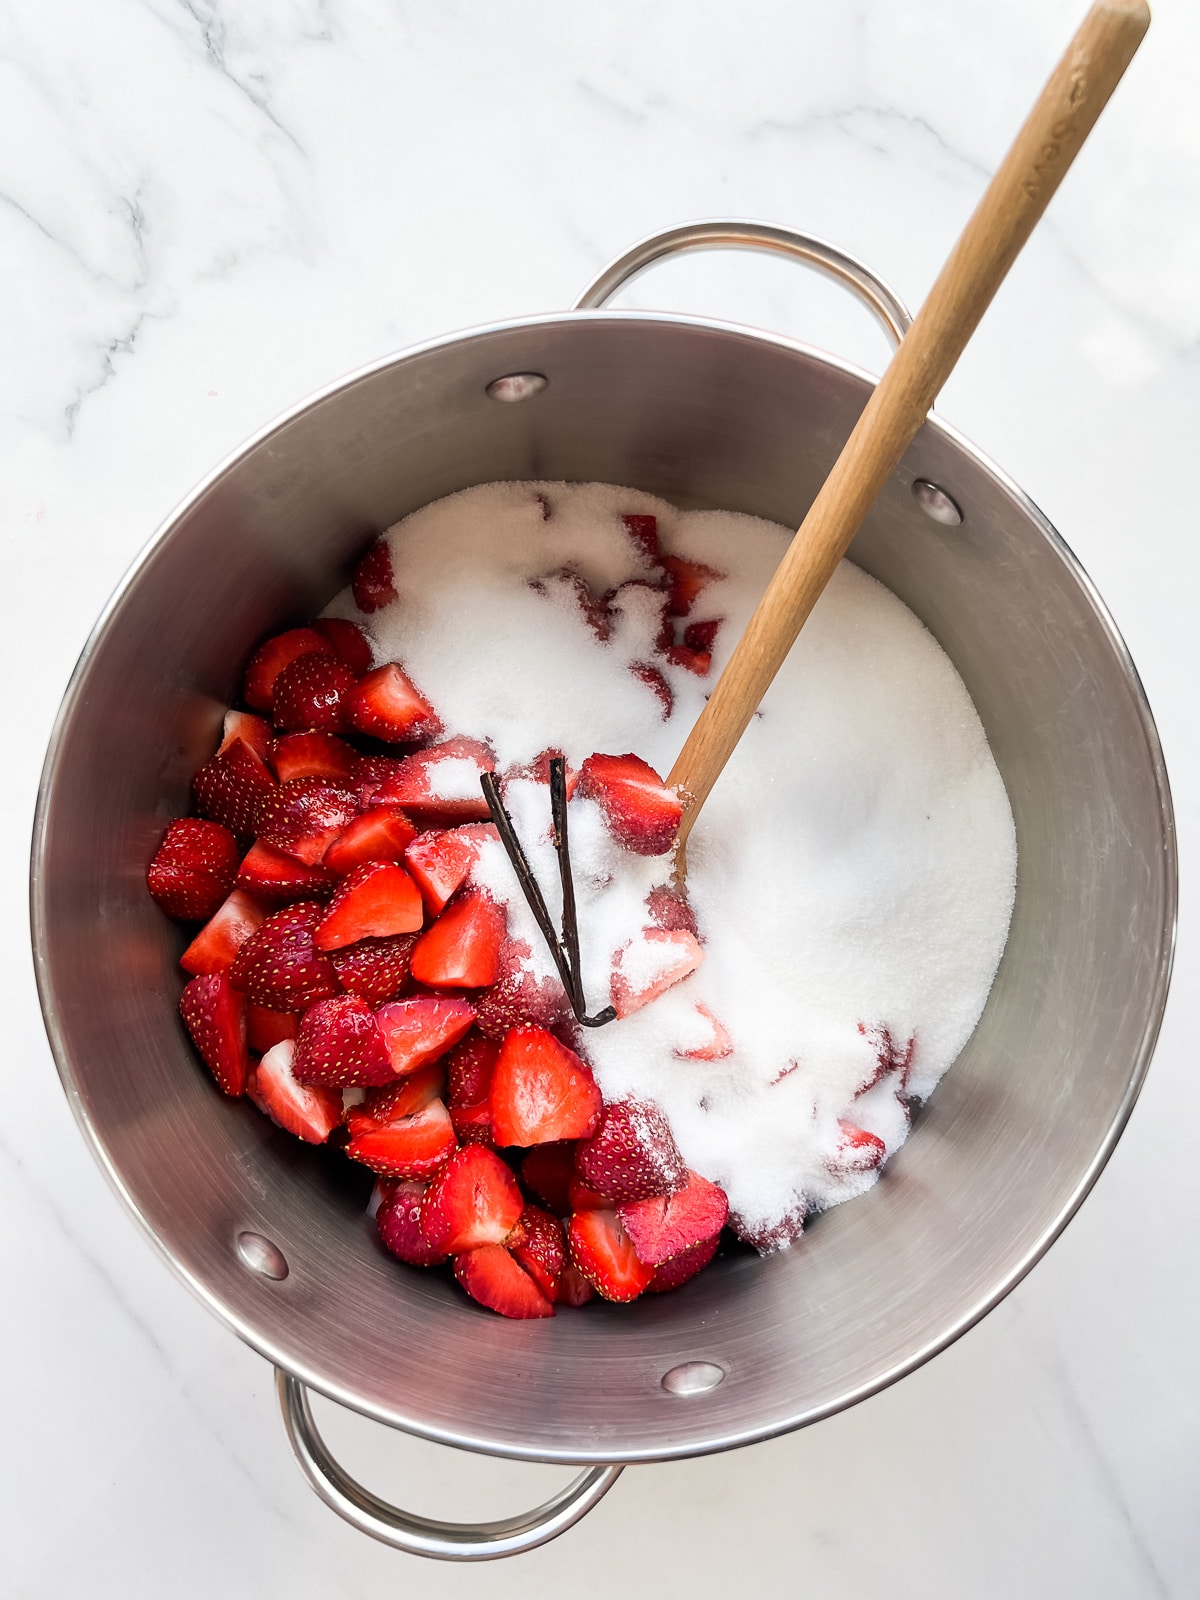 Combining sliced strawberries with sugar and a vanilla bean to macerate before making homemade jam.